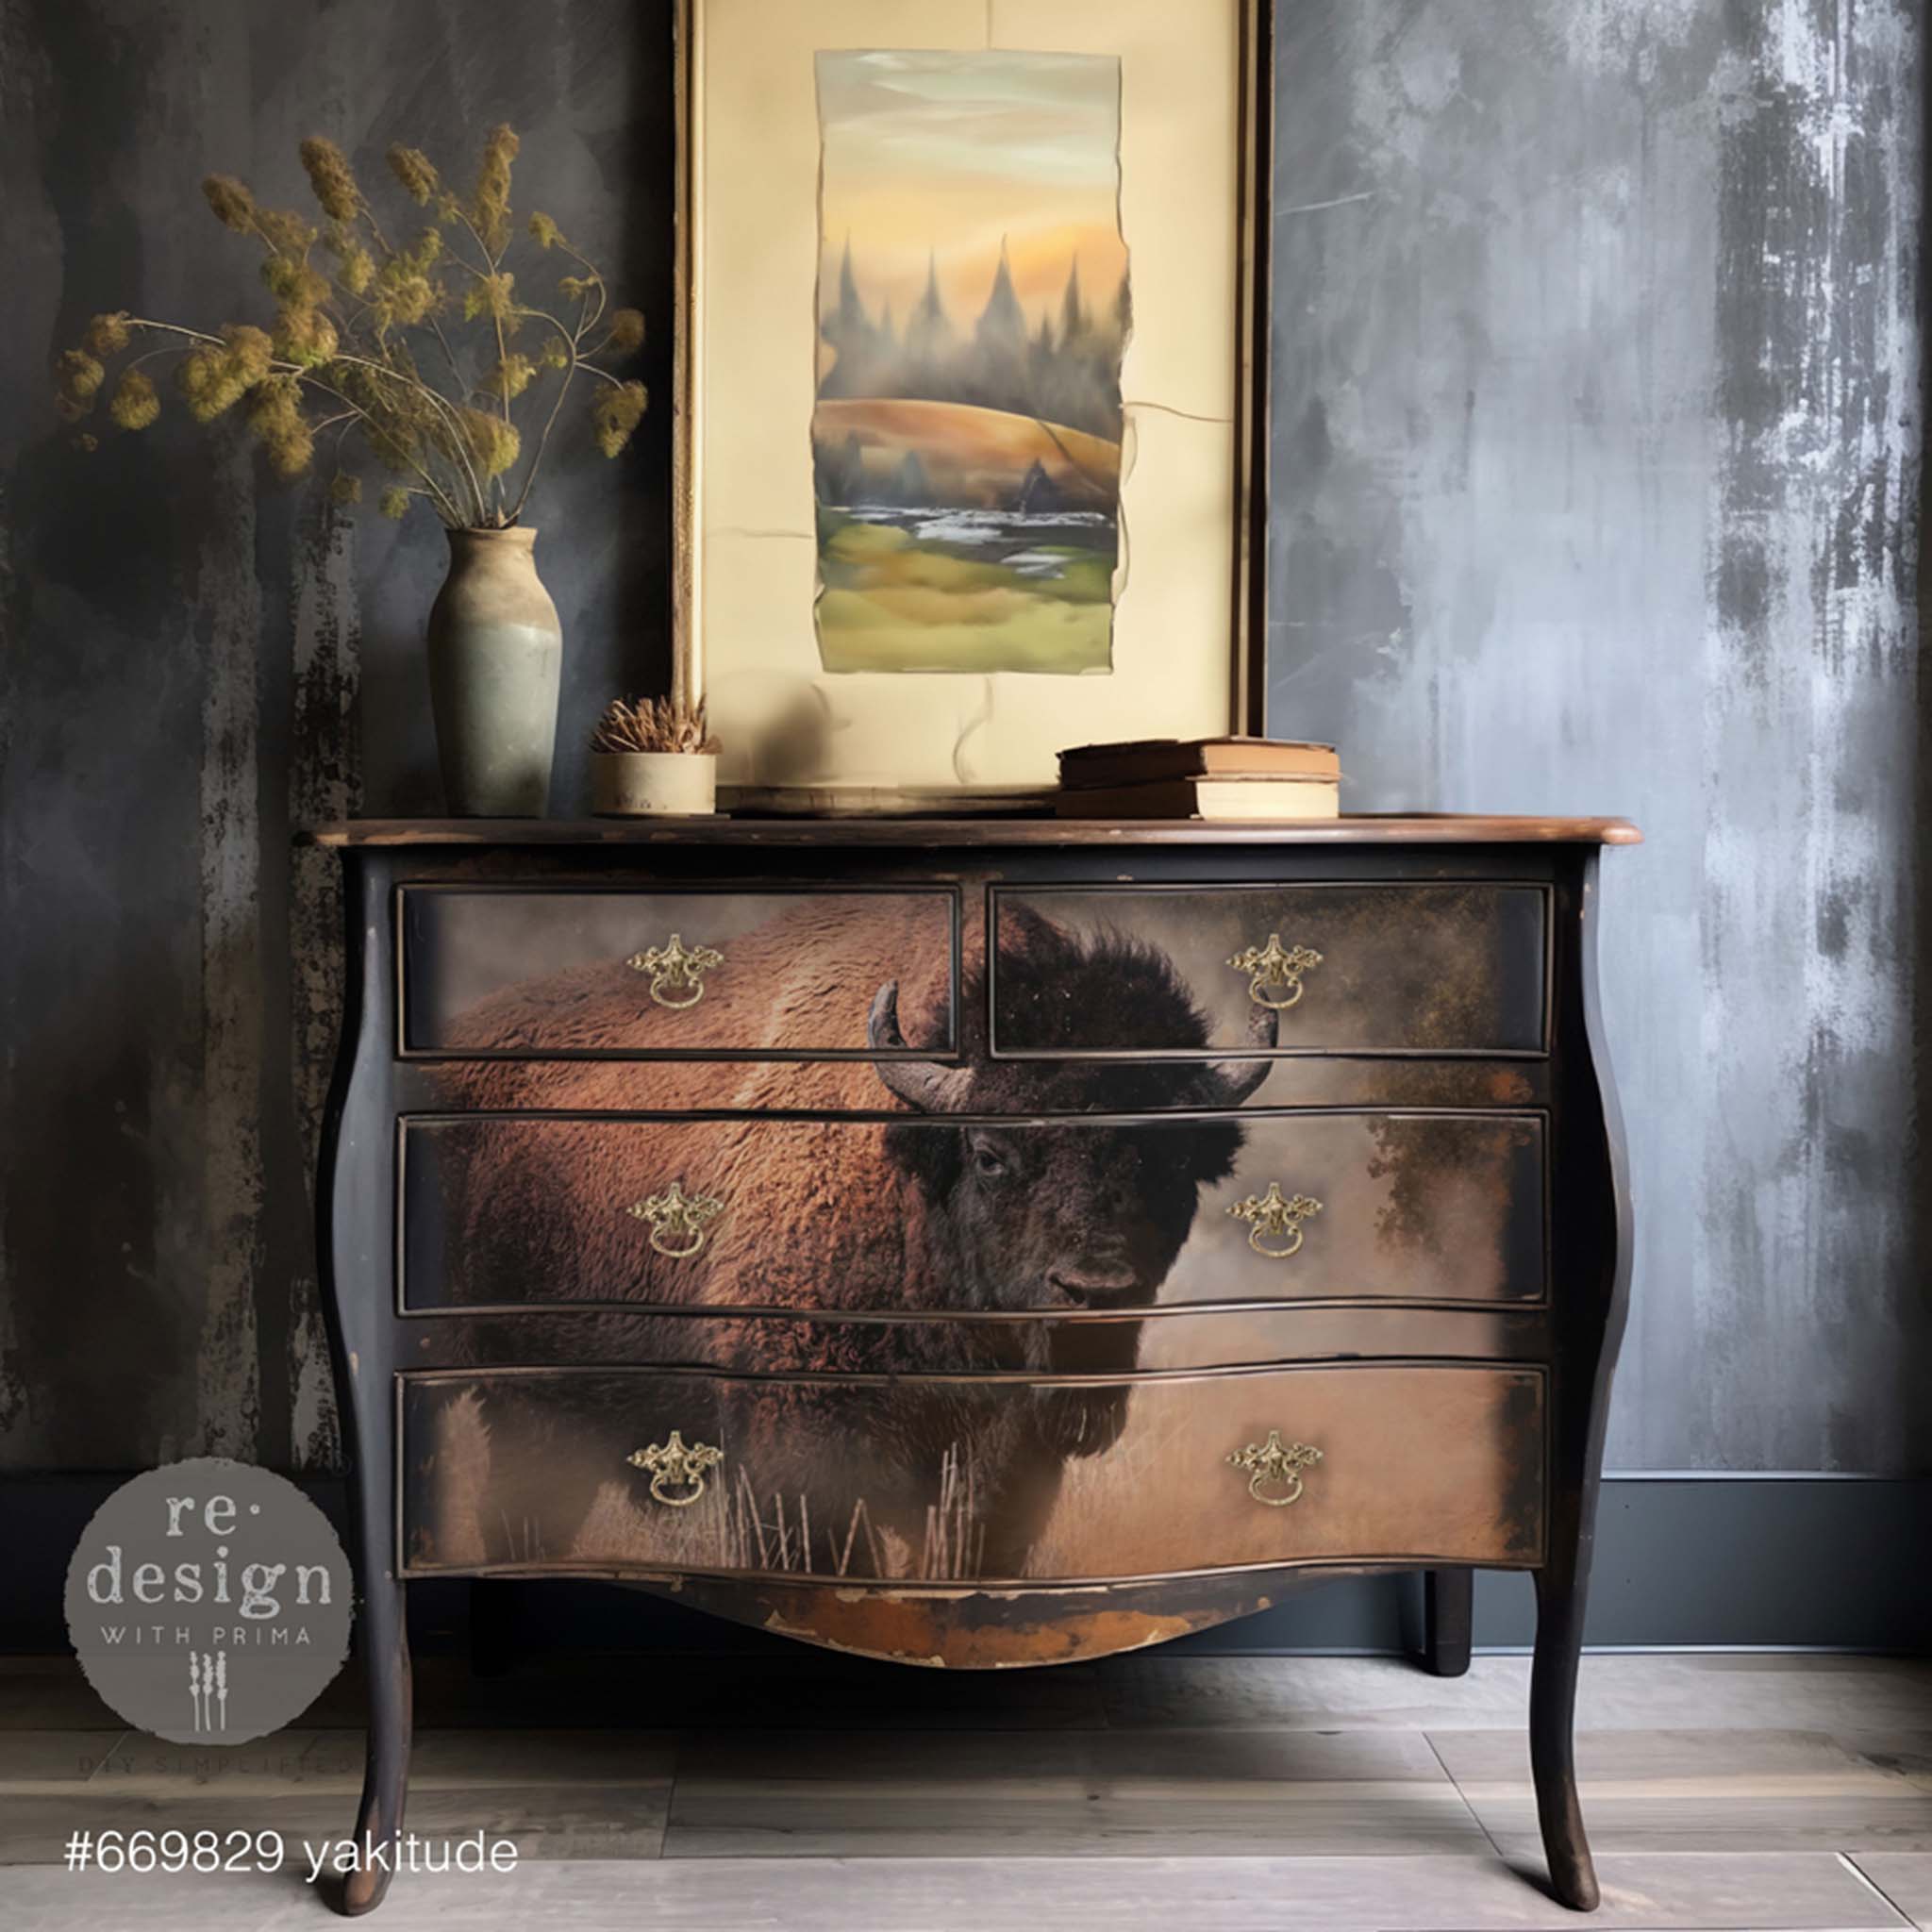 A vintage 4-drawer dresser is painted black and features ReDesign with Prima's Yakitude A1 fiber paper on the front of it.